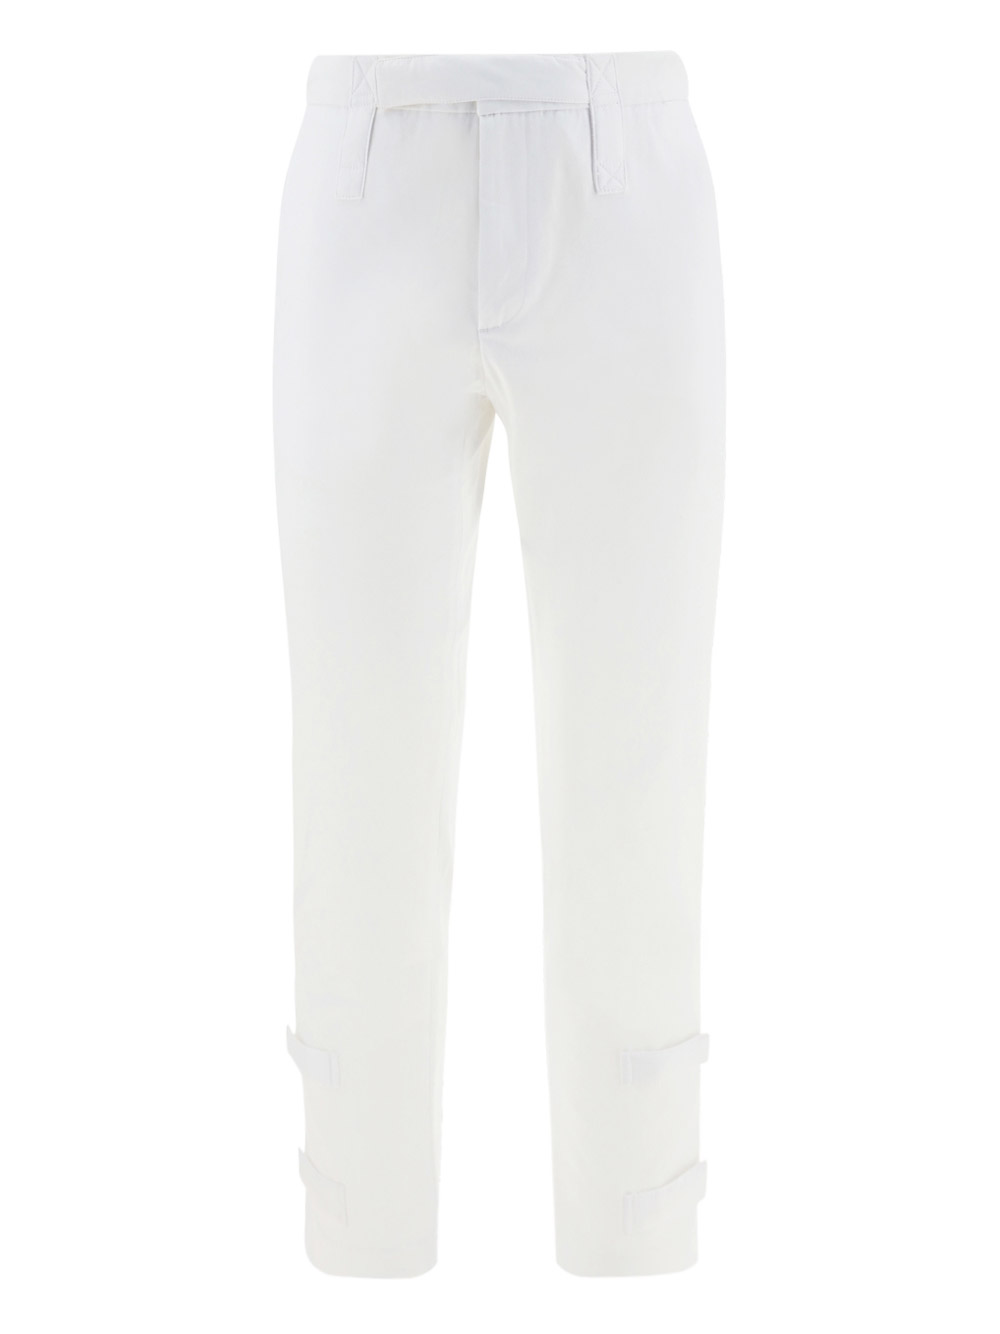 Les Hommes Pants In White